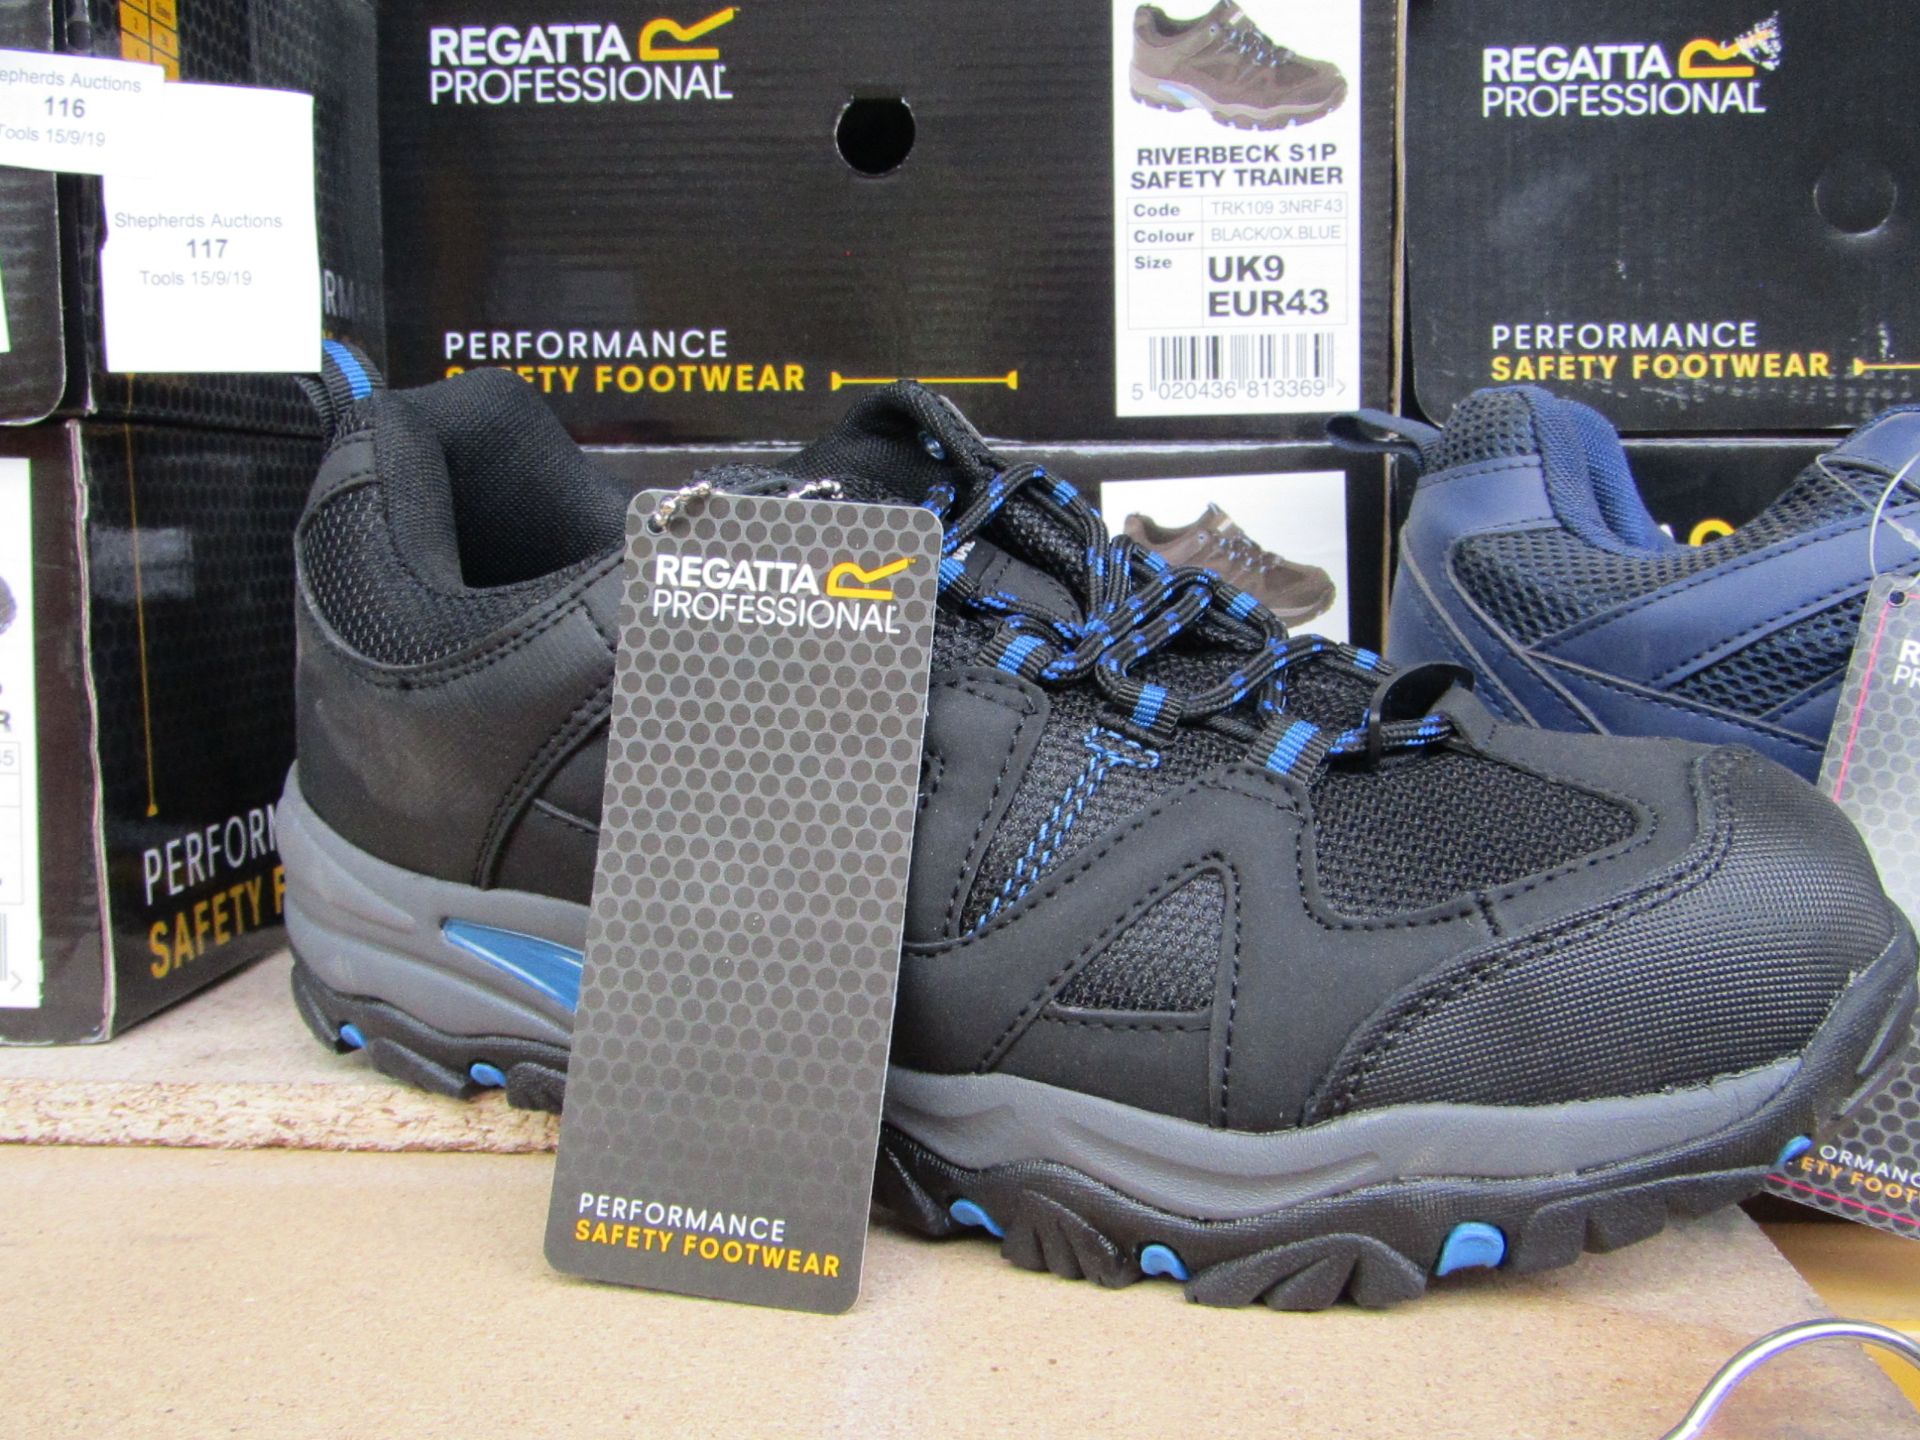 Regatta Professional Riverbeck S1P Safety Trainer. Size 9, EUR 43. New and boxed